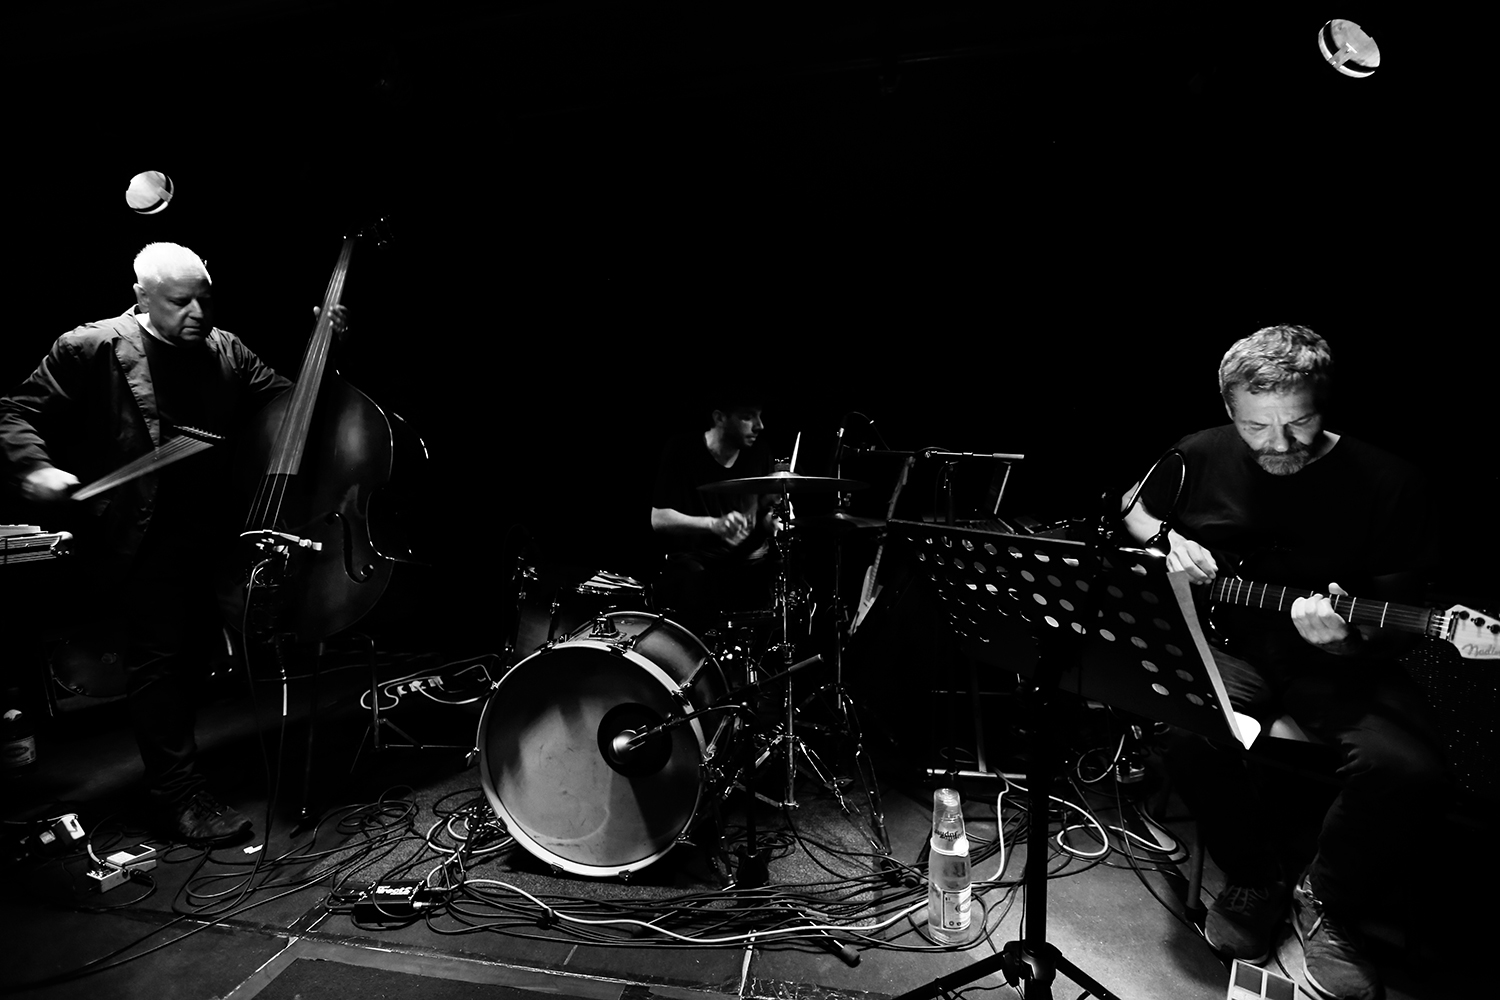 Arnold Dreyblatt & The Orchestra of Excited Strings by Laurent Orseau - Concert - Les Ateliers Claus - Brussels, Belgium #1